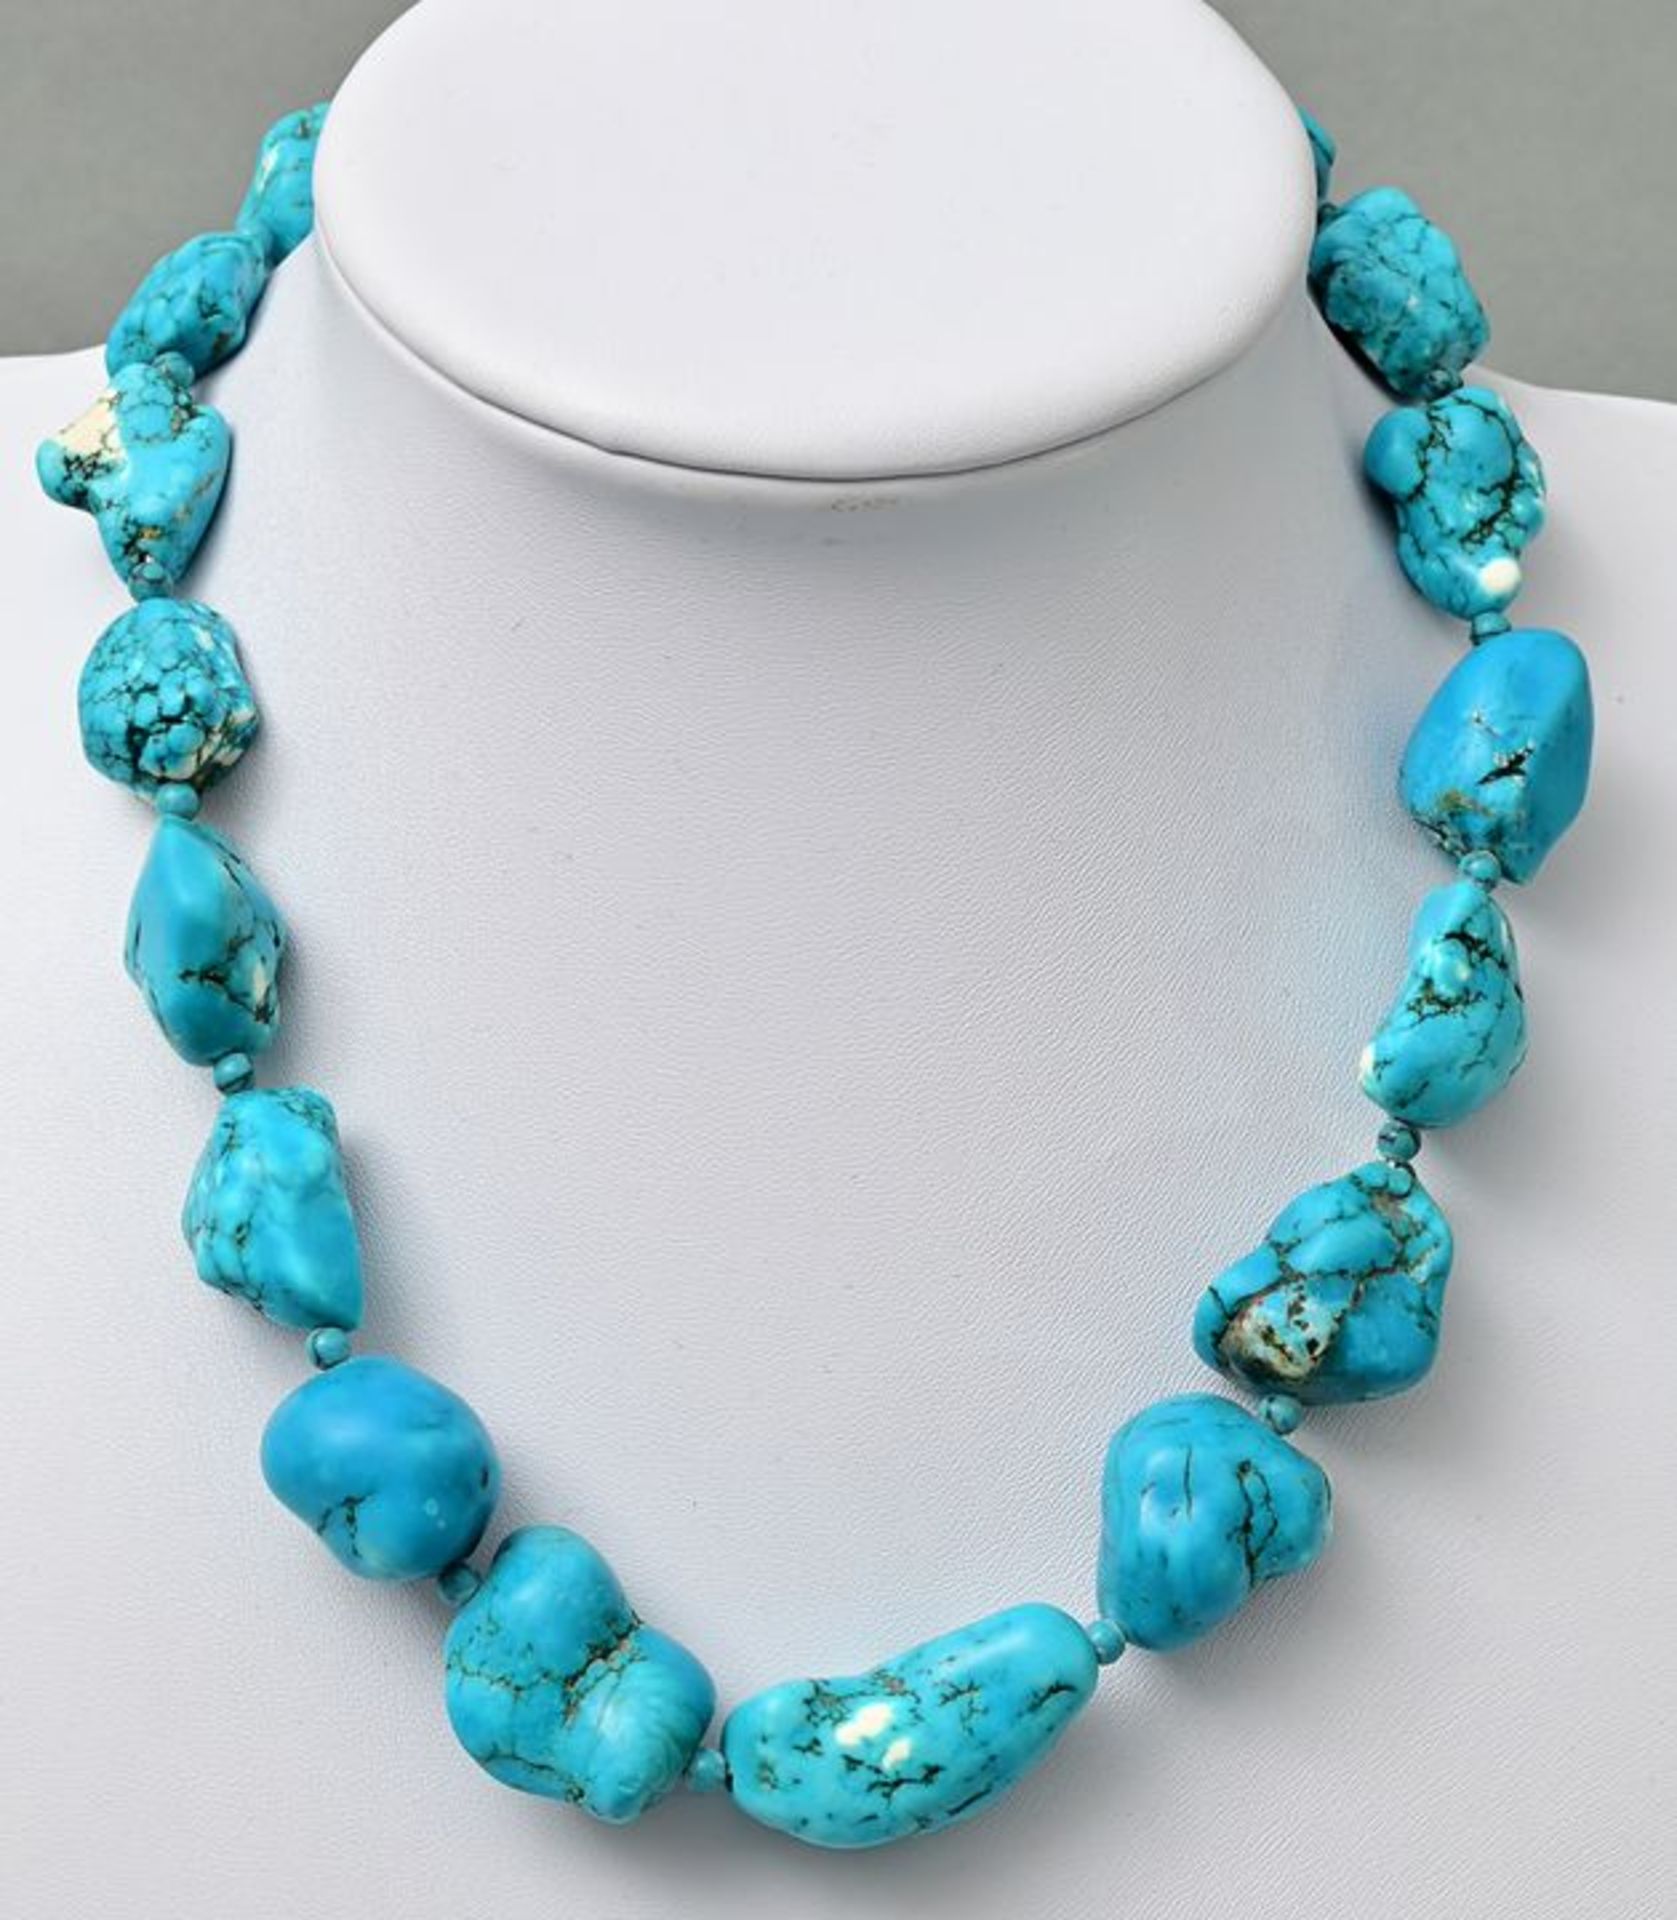 Kette Türkis/ turquoise necklace